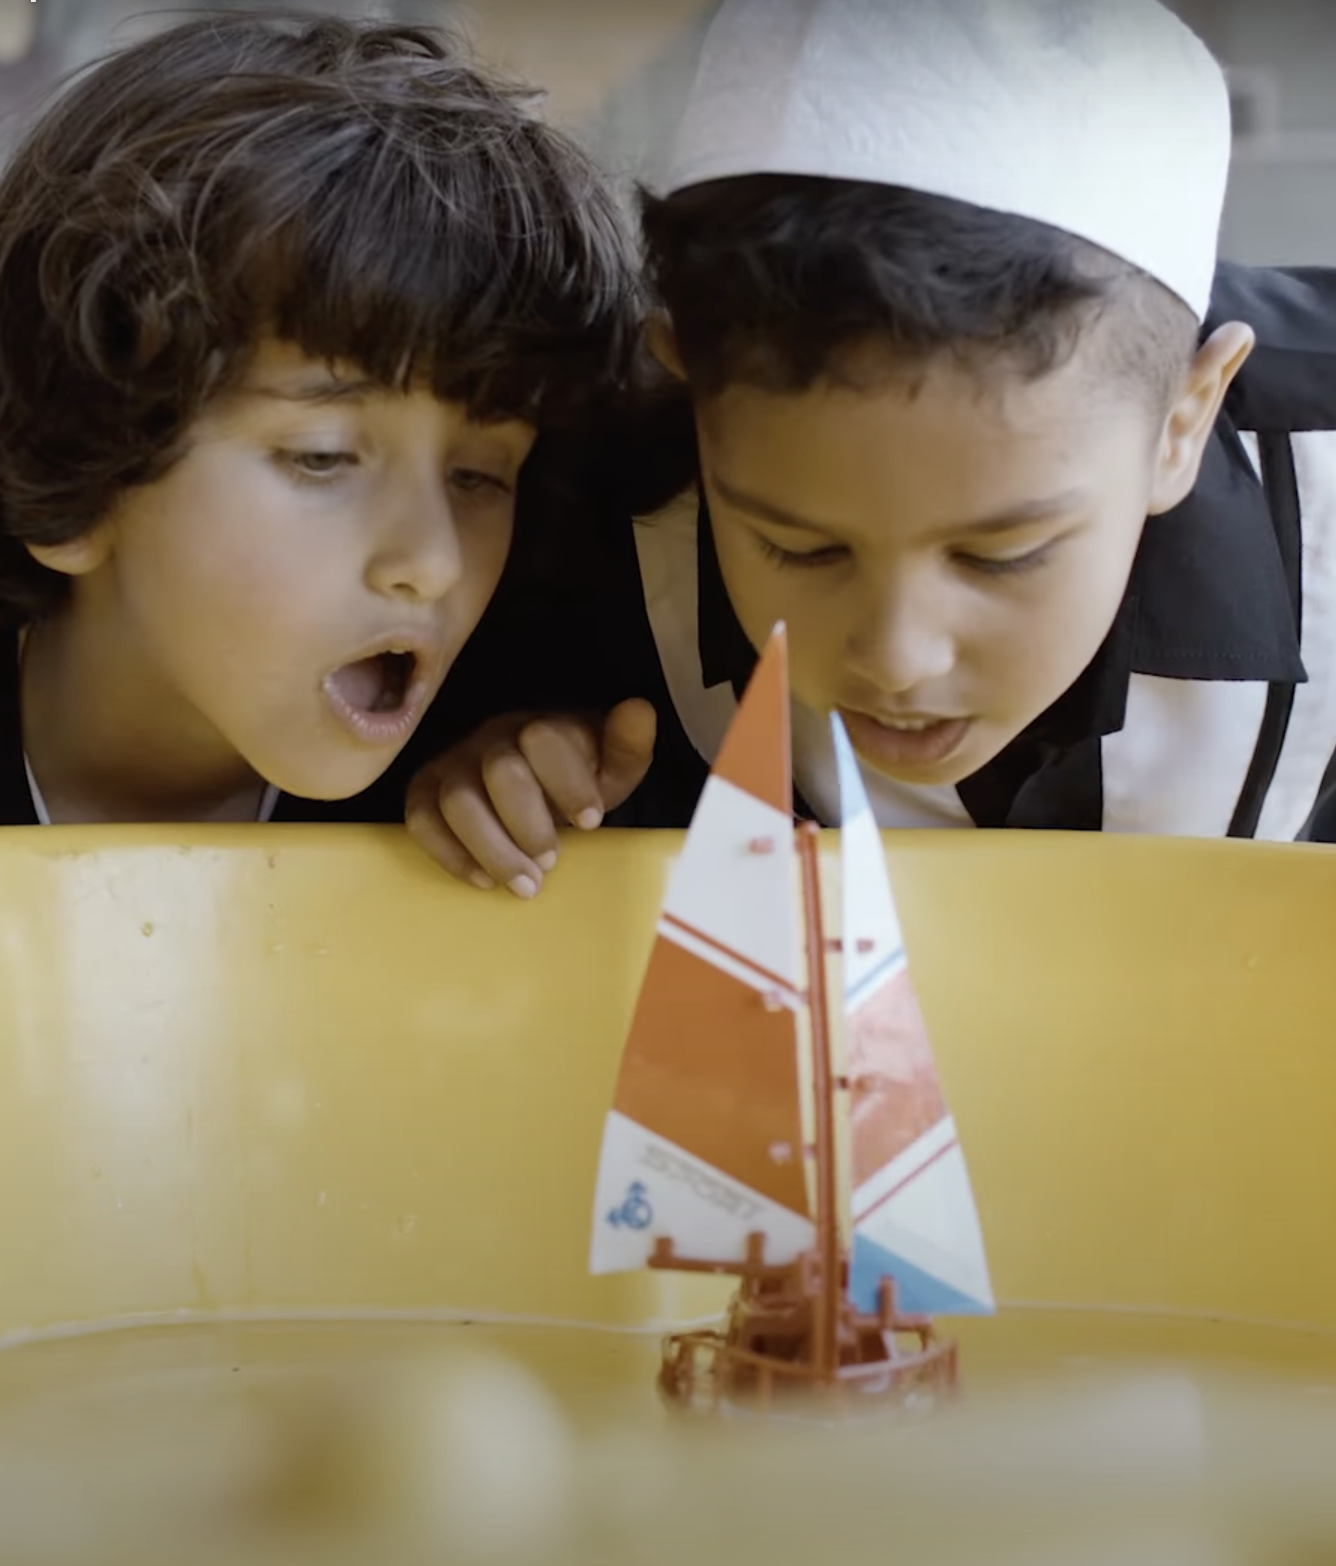 two children blowing on a toy sailboat